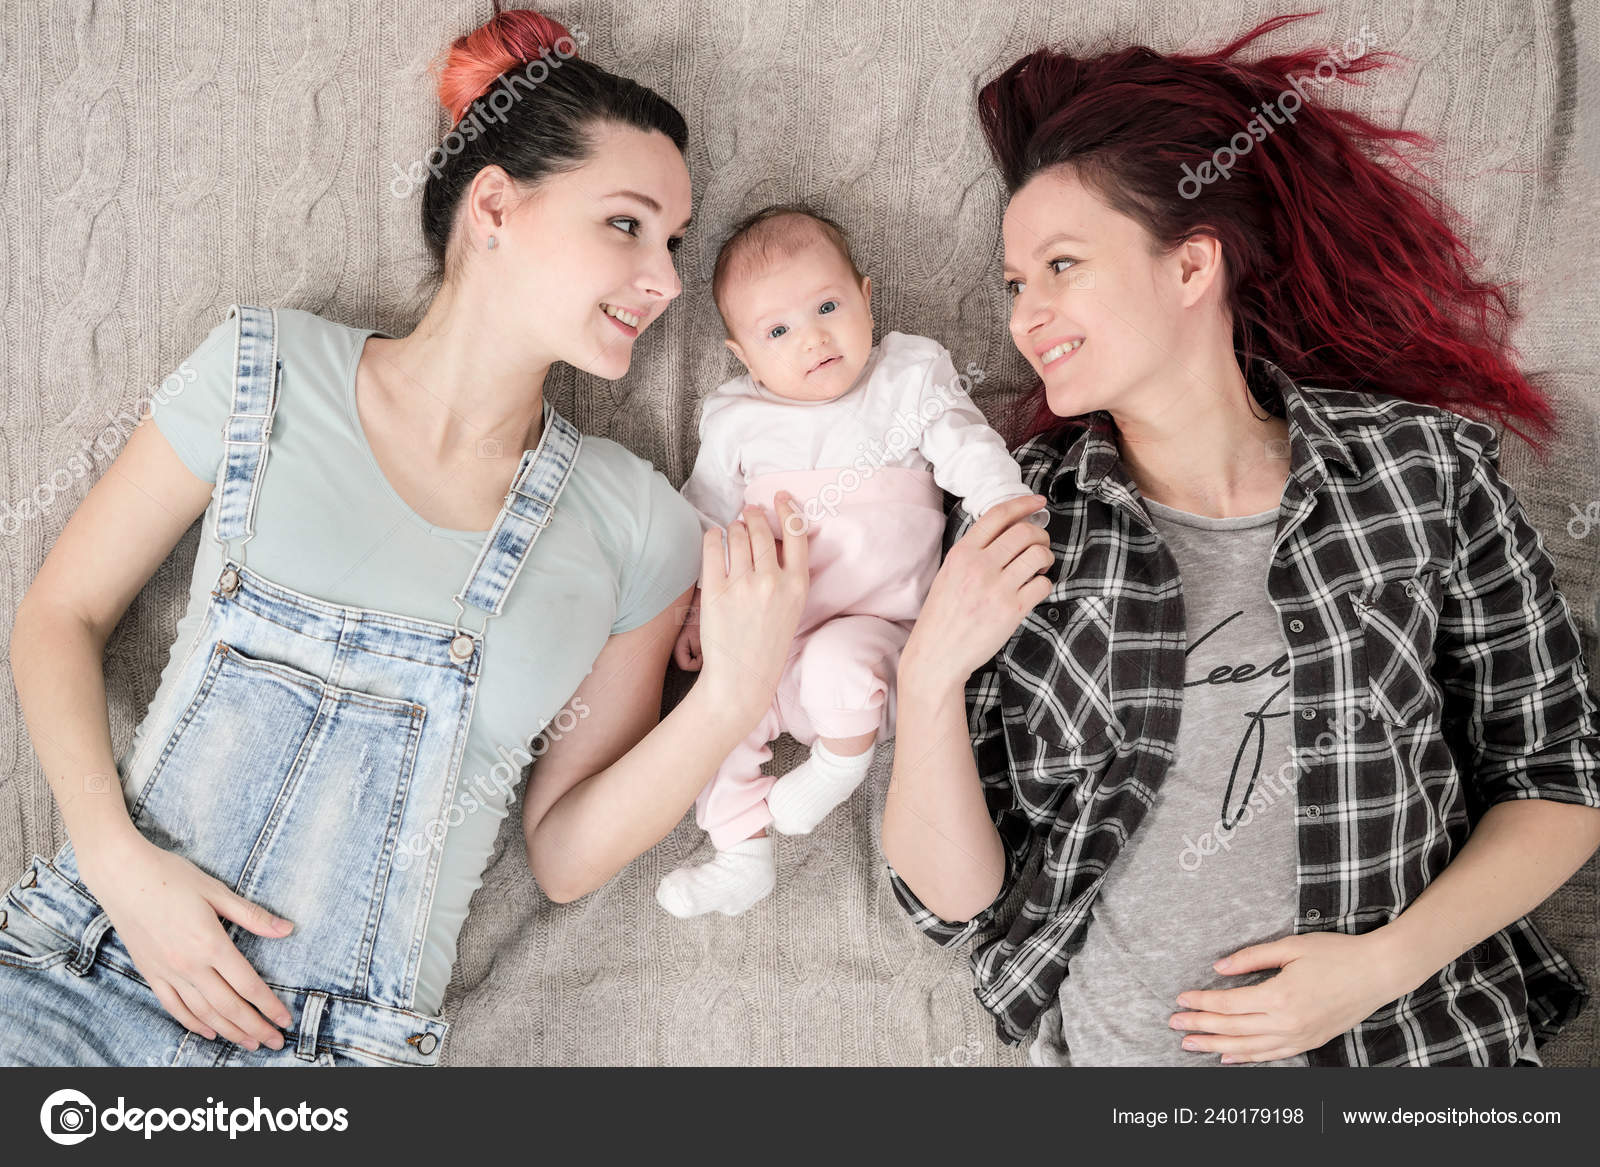 Two young women, a lesbian homosexual couple, are lying on a blanket with a child pic image